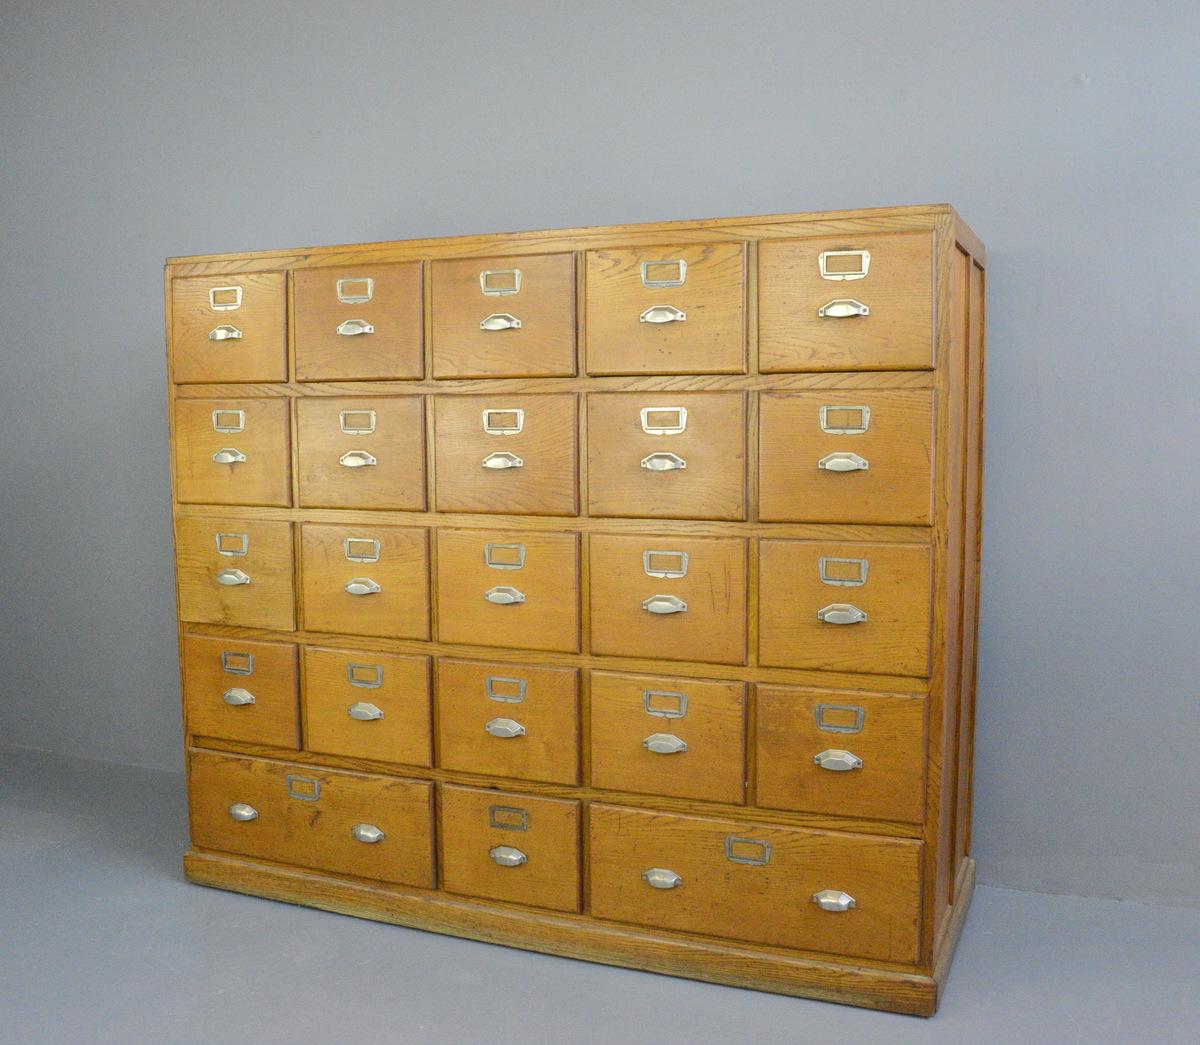 Large bank of French Art Deco filing drawers, circa 1930s.

- Solid oak drawers and frame
- Oak ply panels on the sides
- Geometric cup handles
- 21 small drawers and two large,
- French, circa 1930s
- Measures: 173 cm wide x 66 cm deep x 149